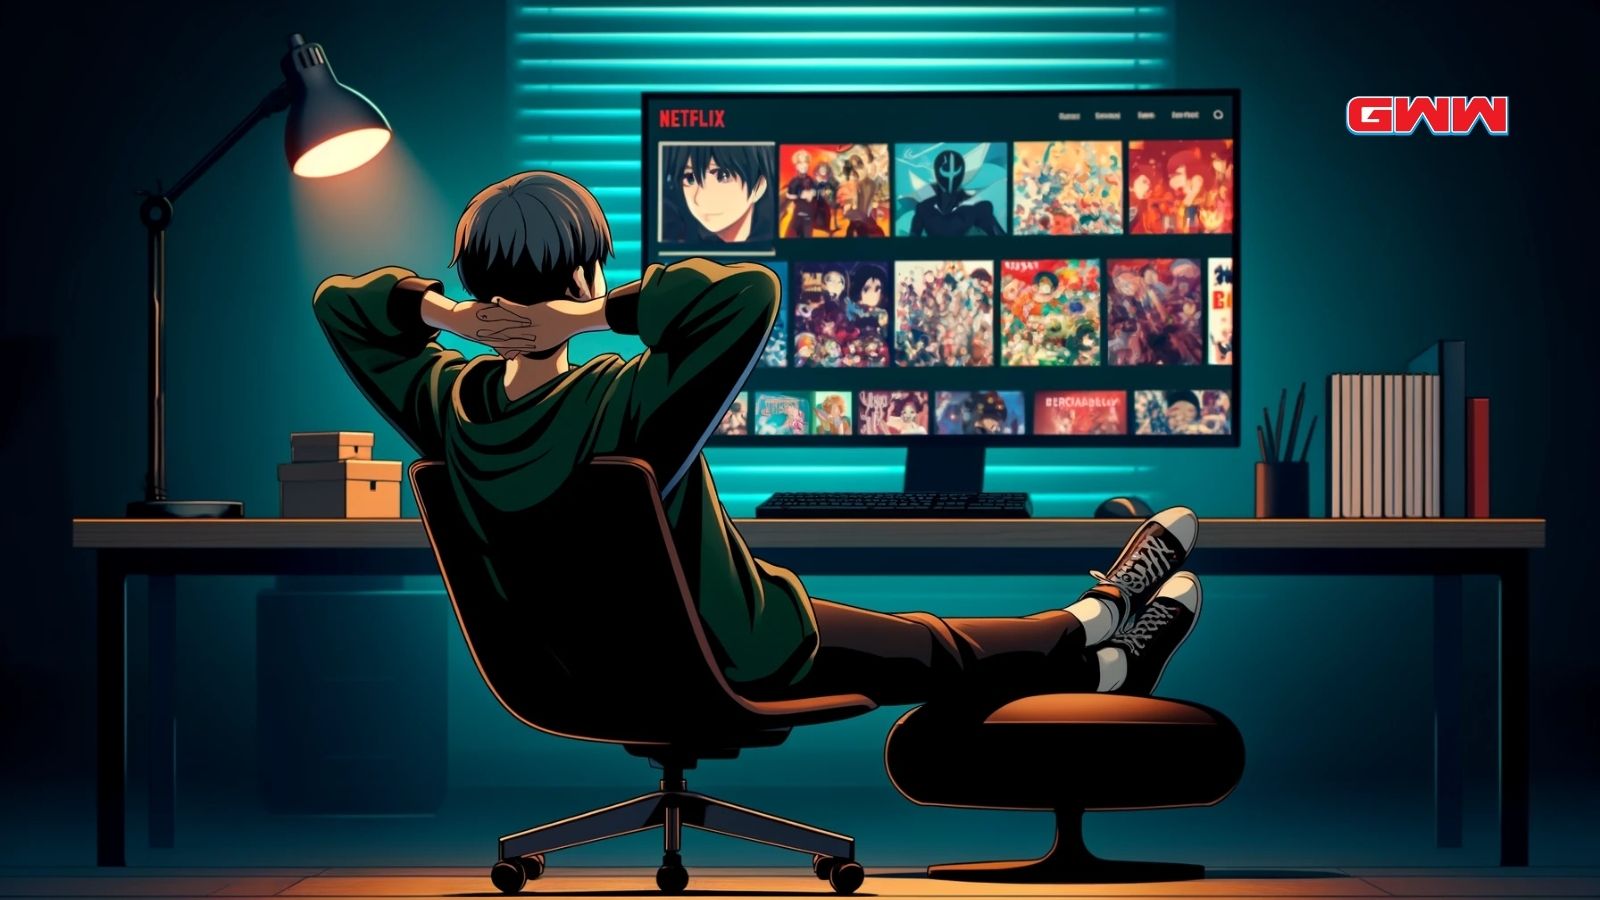 A guy watching anime from another streaming platform